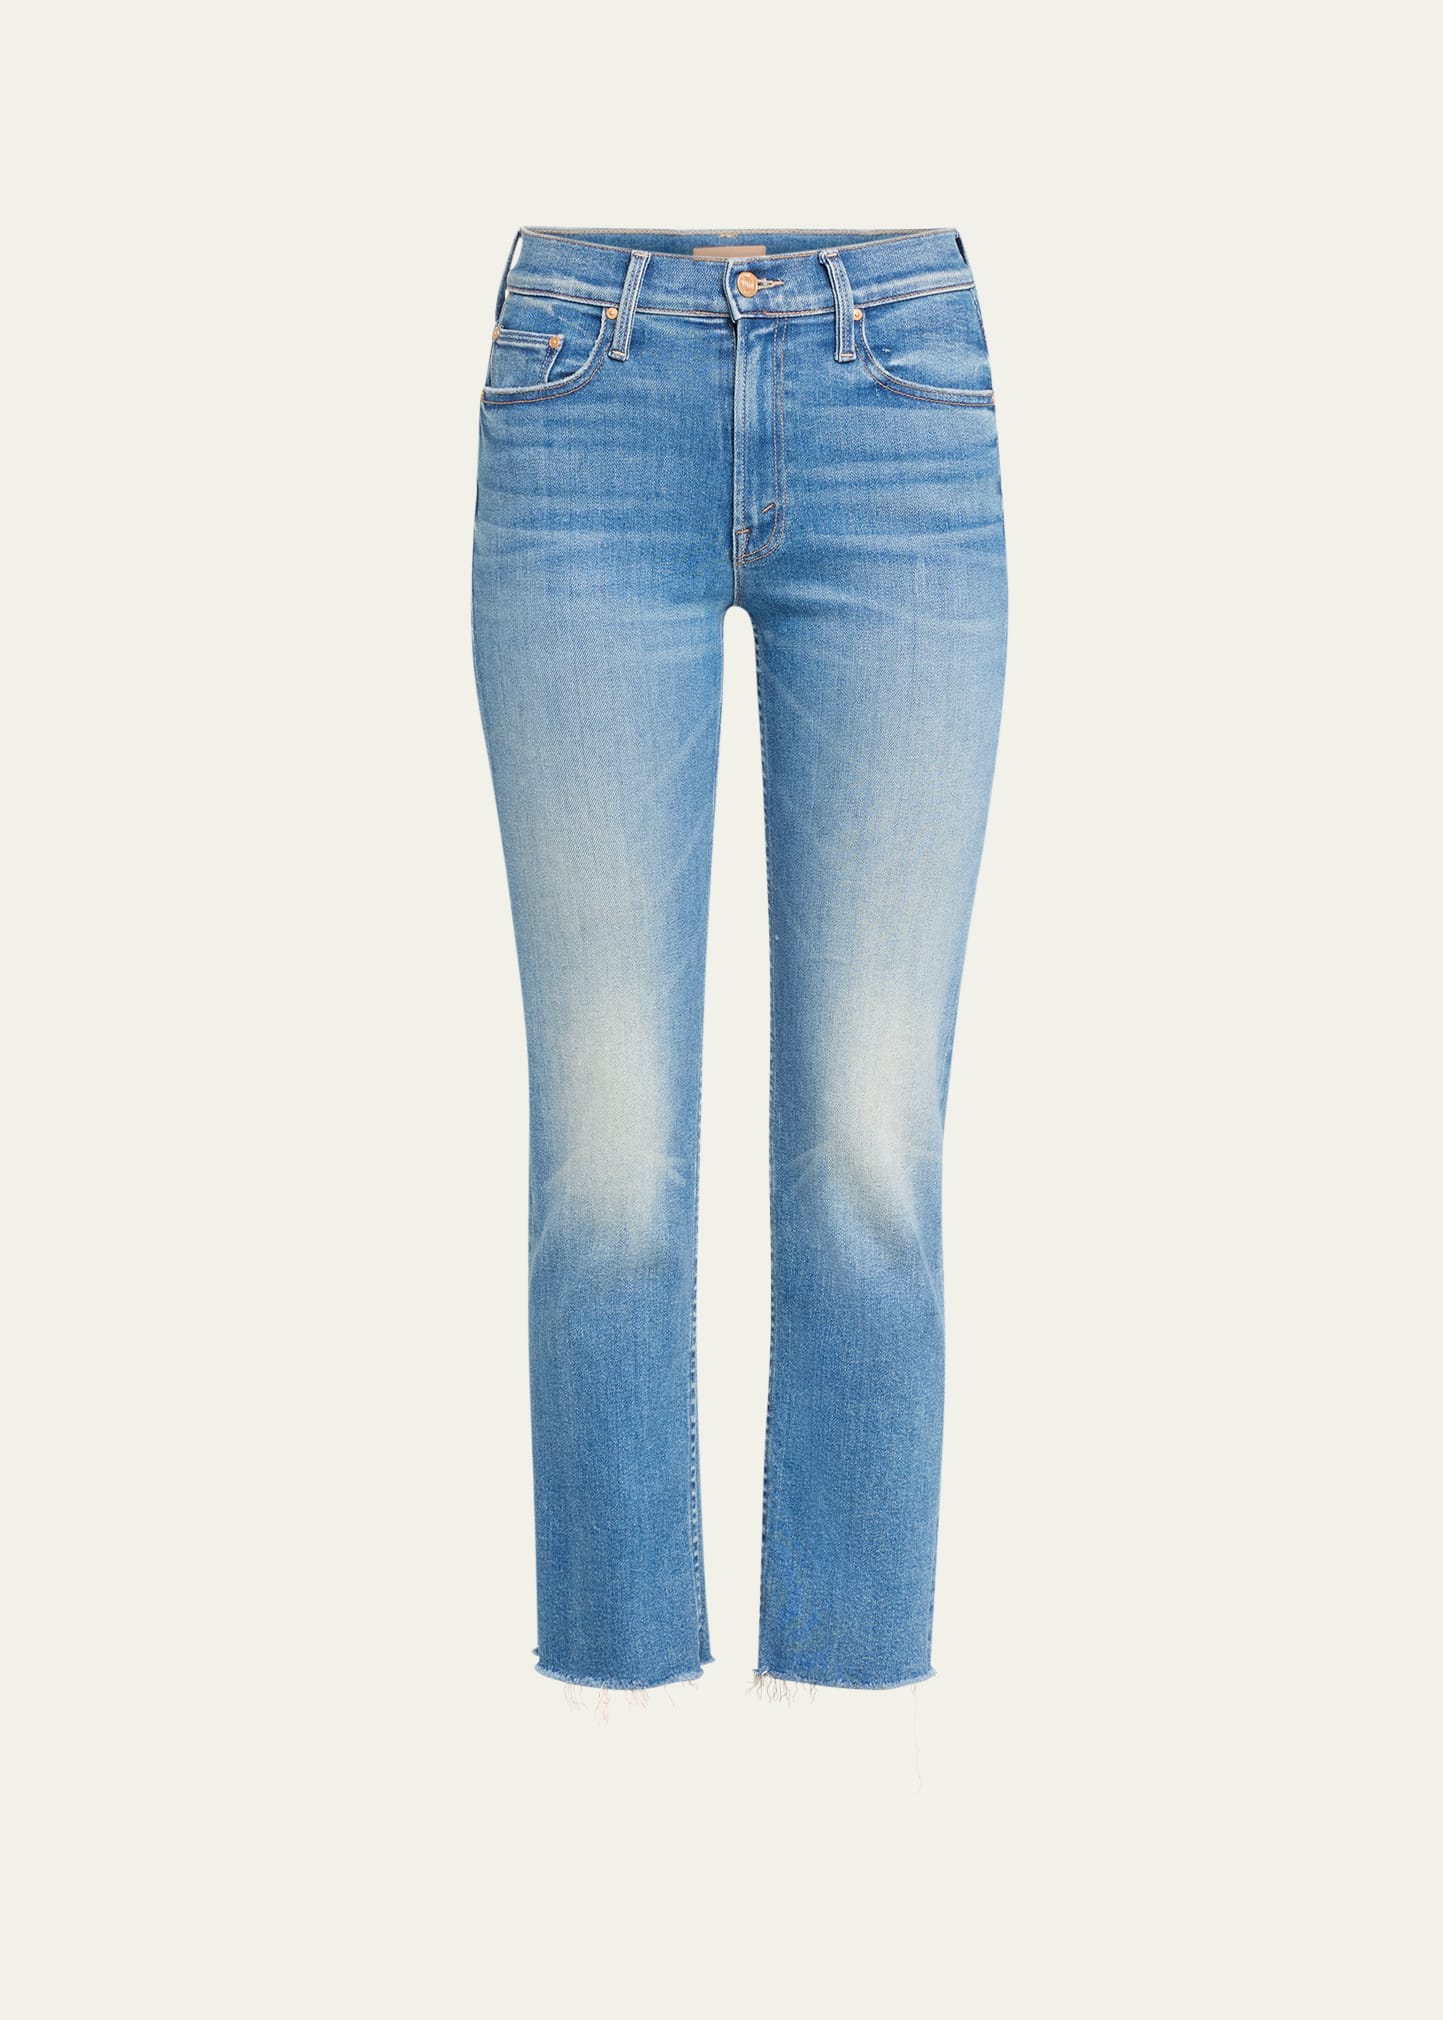 The Mid-Rise Rider Flood Fray Jeans